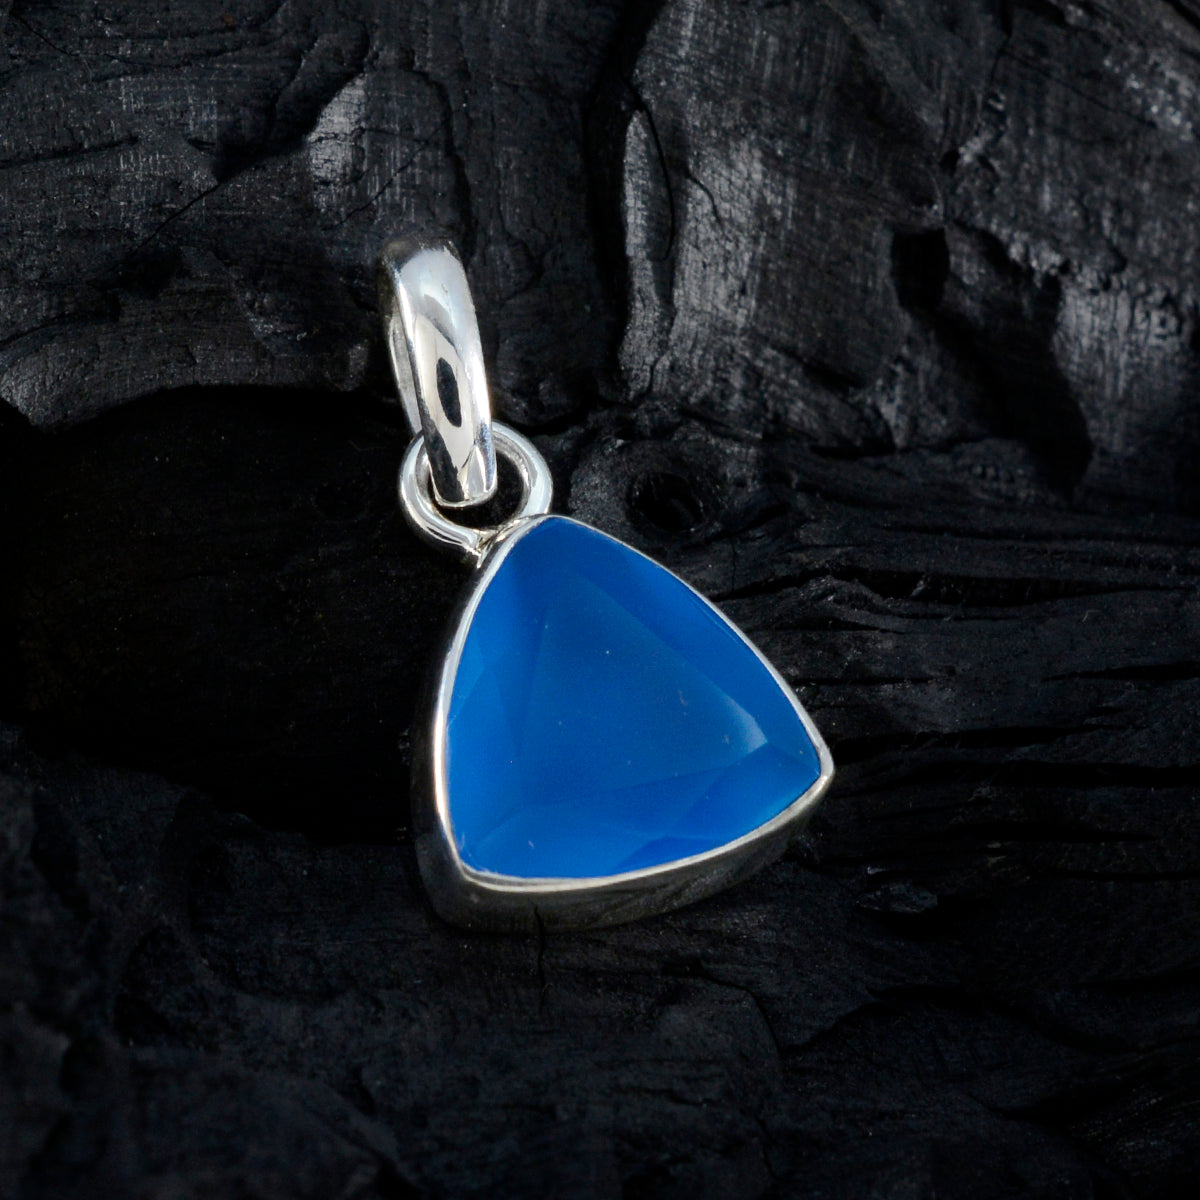 Riyo Stunning Gemstone Trillion Faceted Blue Blue Chalcedony 1200 Sterling Silver Pendant Gift For Girlfriend